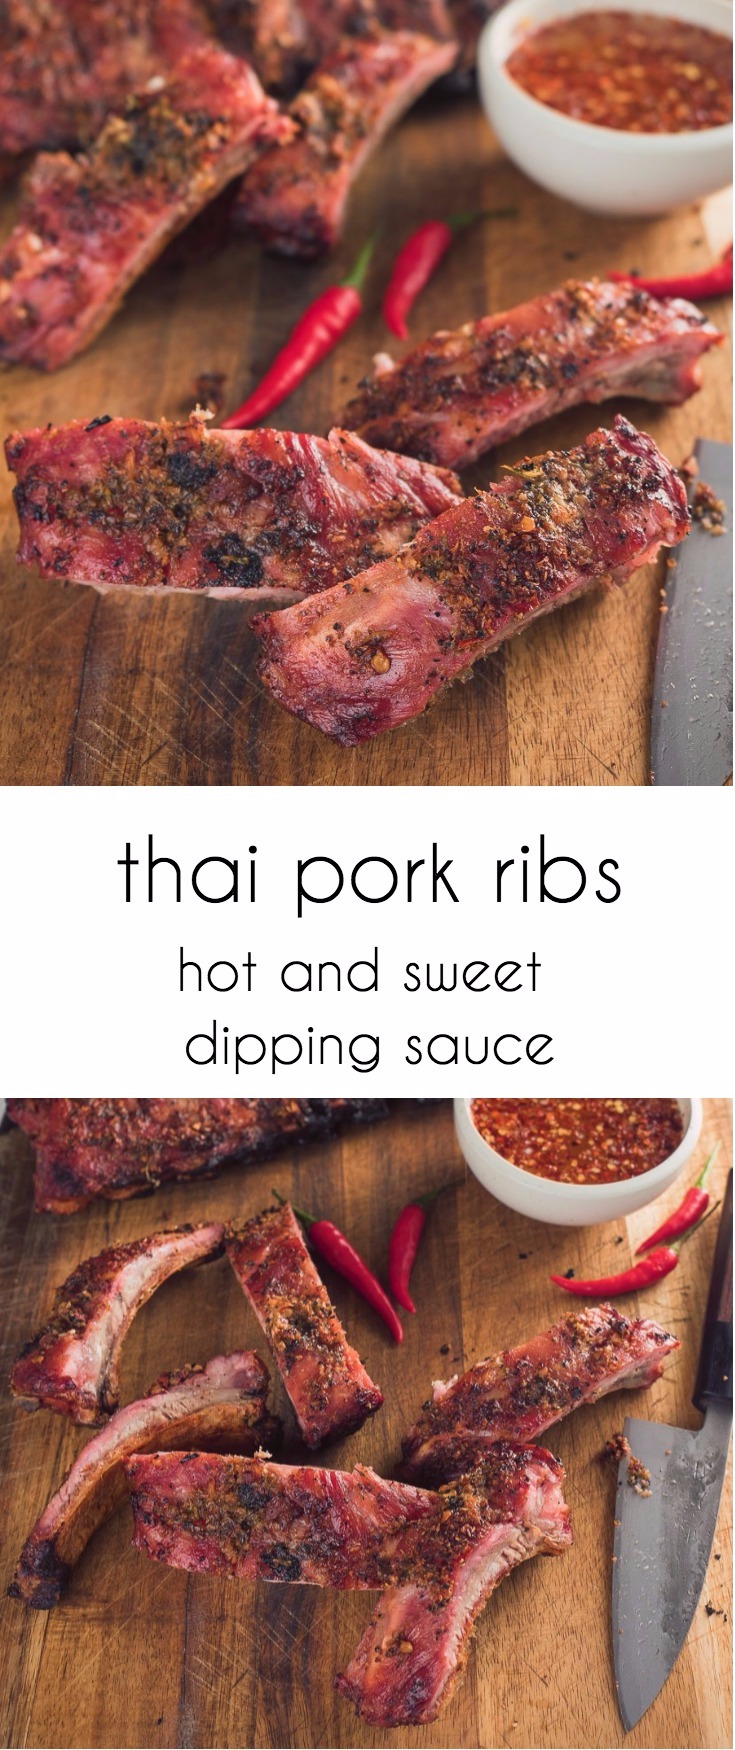 These Thai ribs with hot and sweet dipping sauce are a great way to mix up grilled ribs!